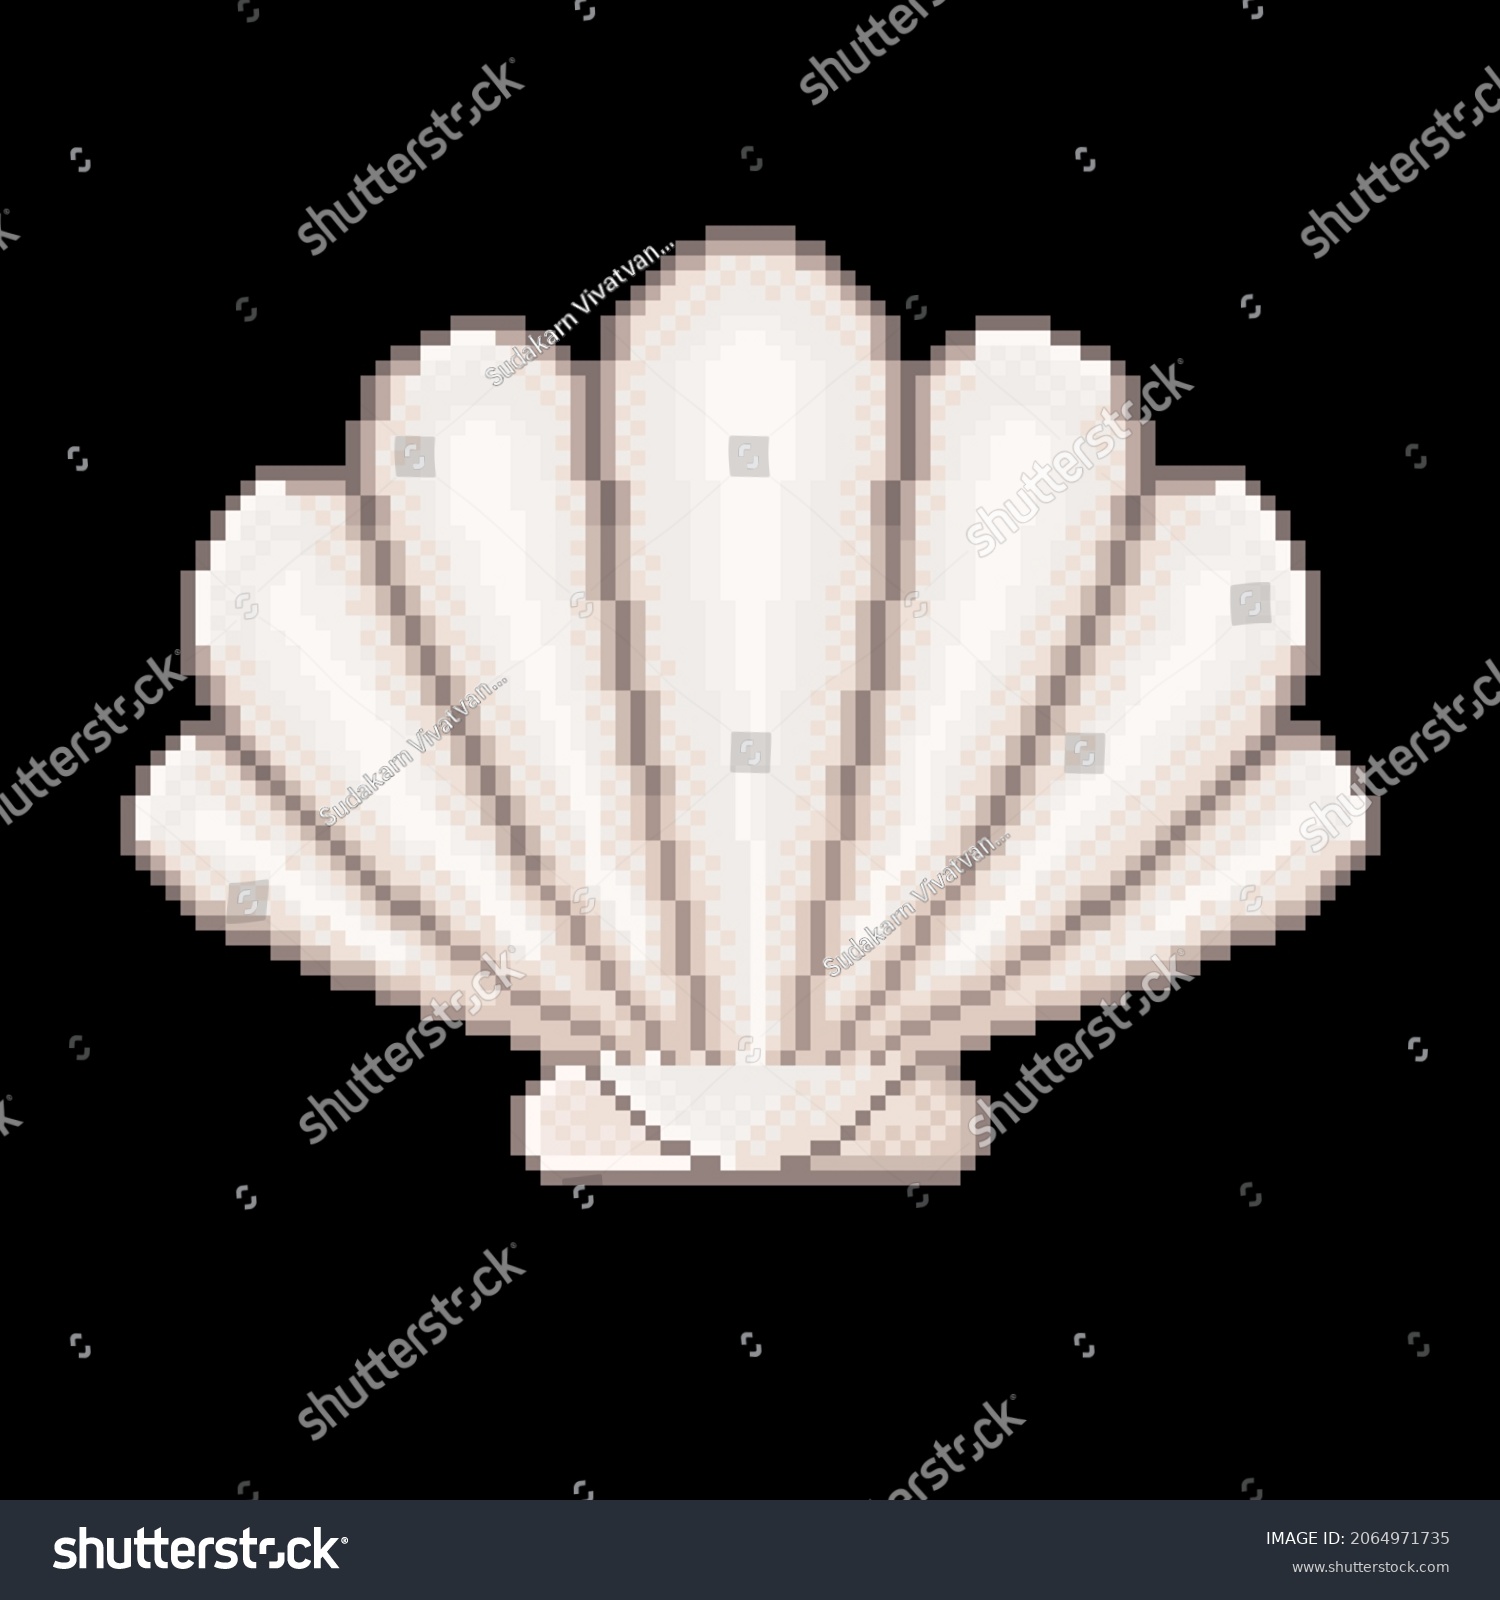 Shell Icon Pixel Art Clam Pixel Stock Vector (Royalty Free) 2064971735